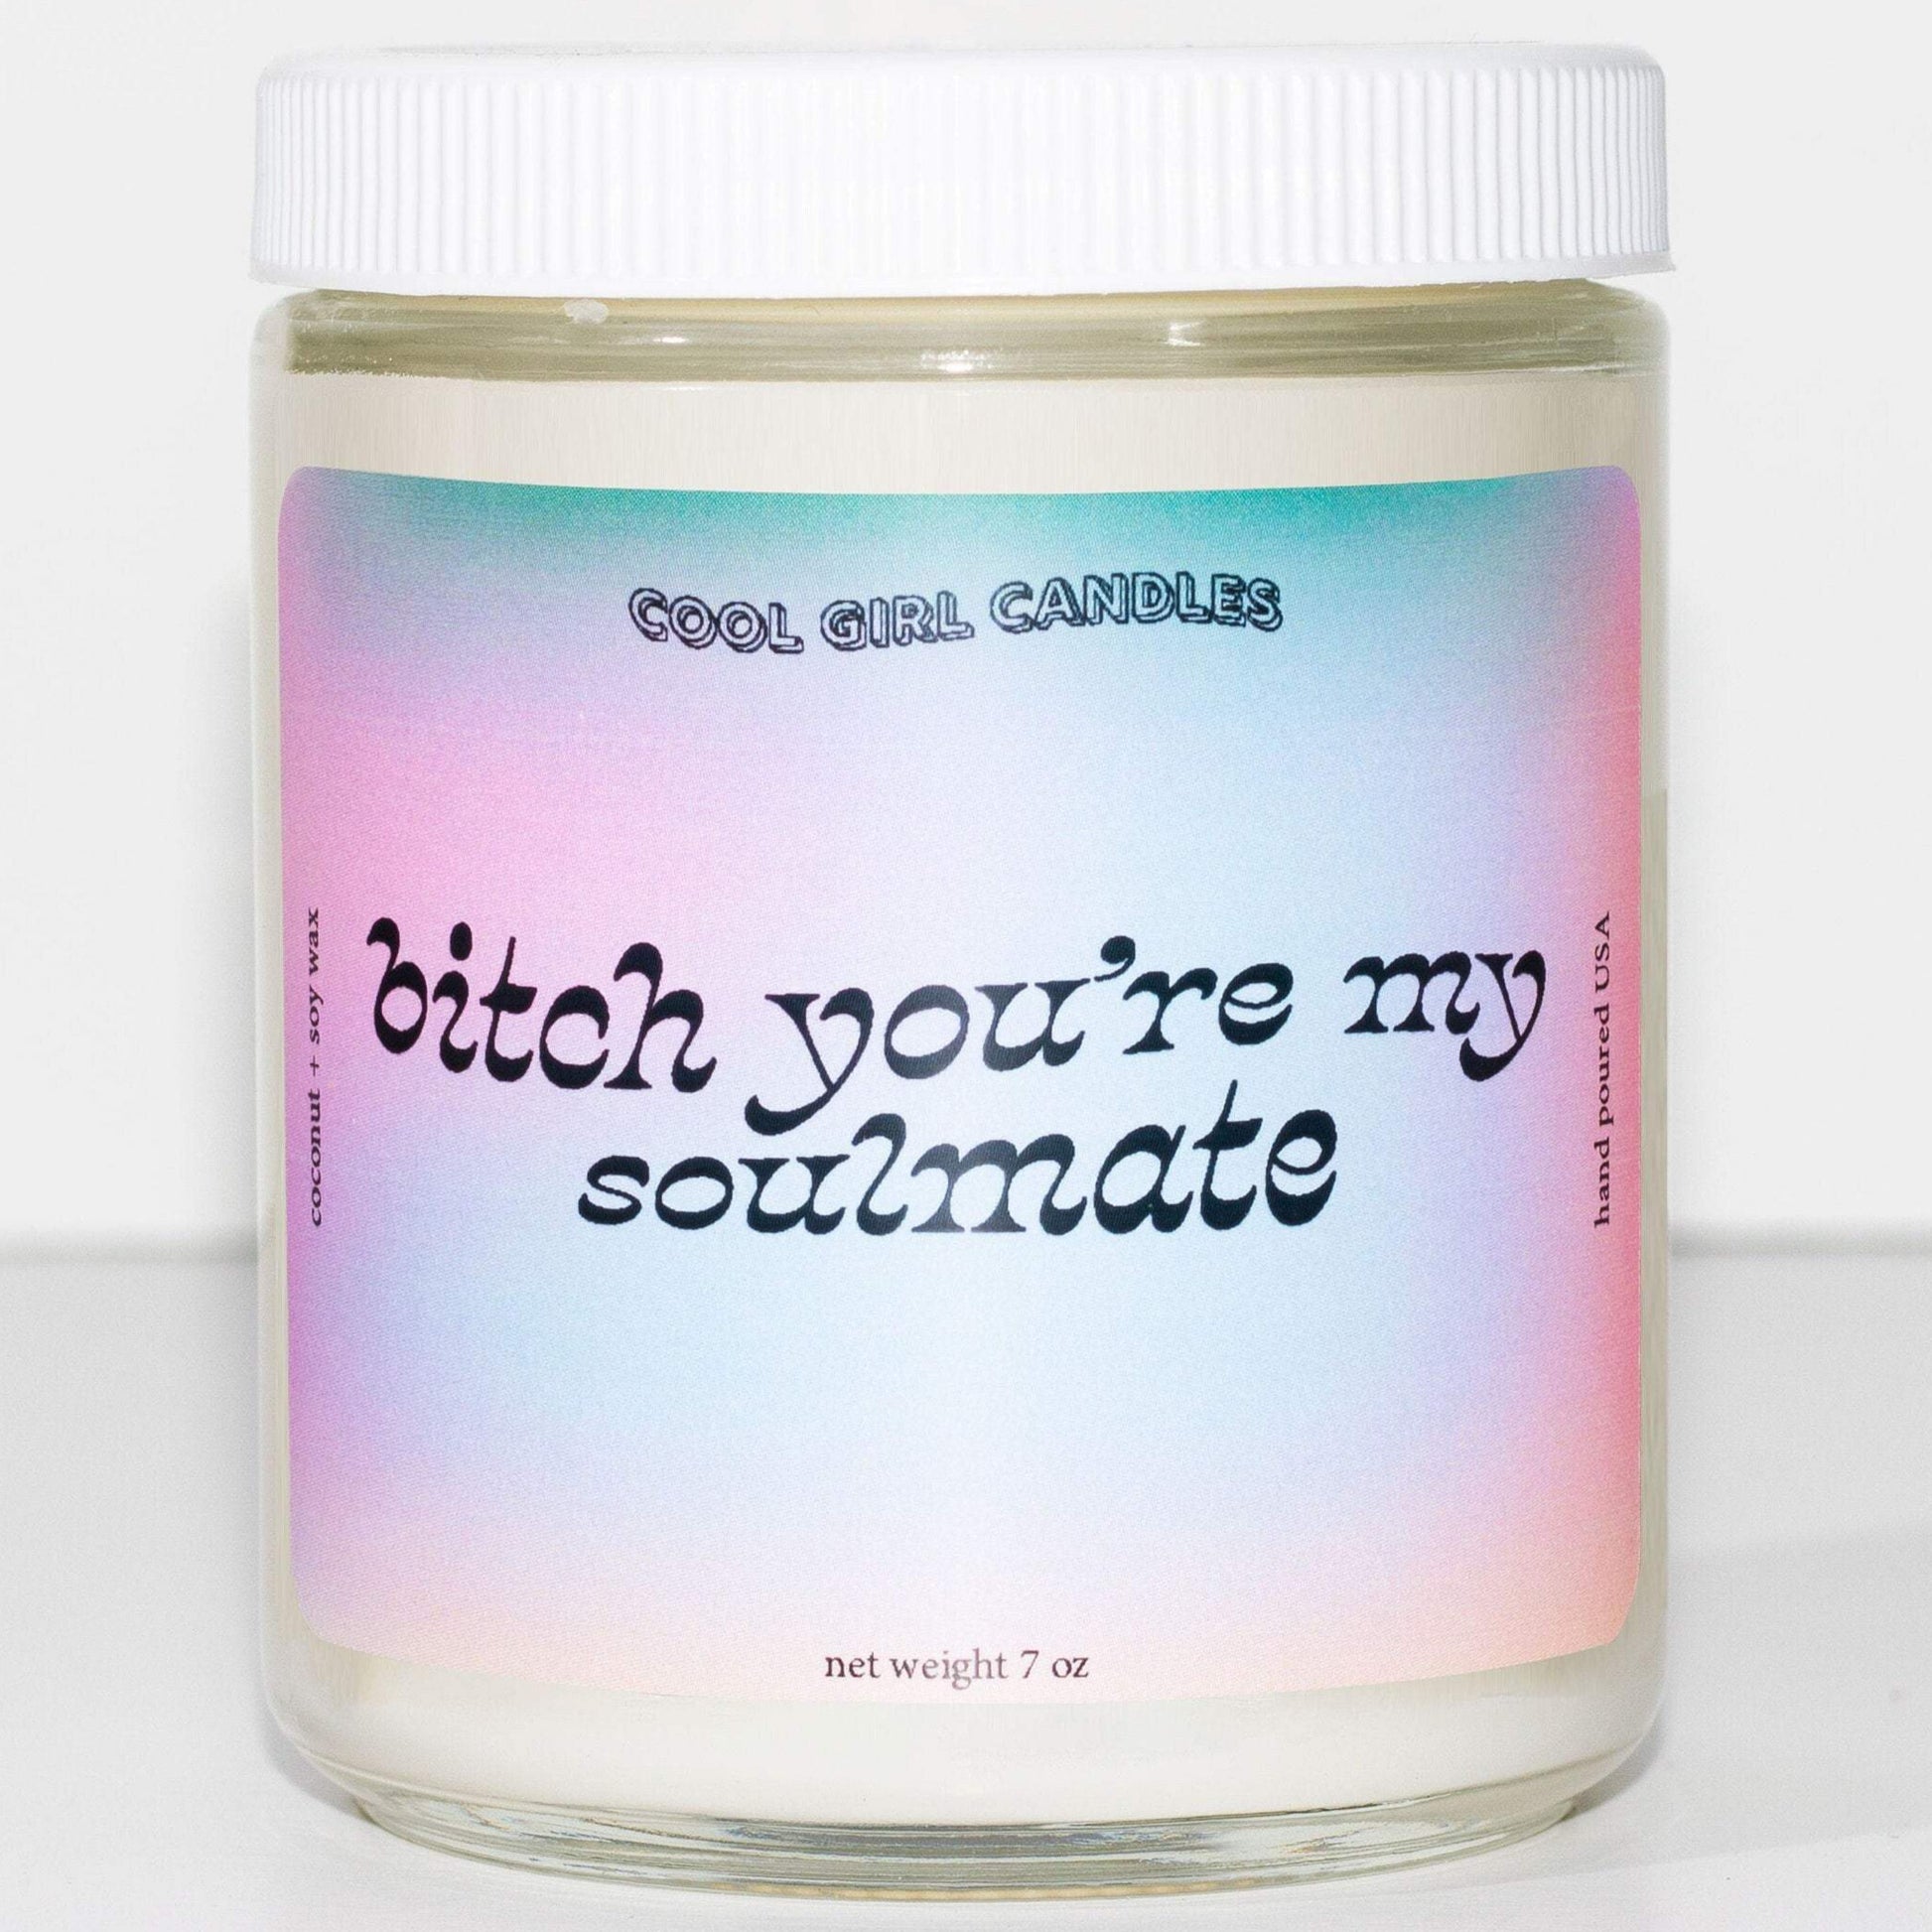 bitch you're my soulmate euphoria merch candle from cool girl candles. Maddy bitch you're my soulmate quote. A Euphoria gift for best friend